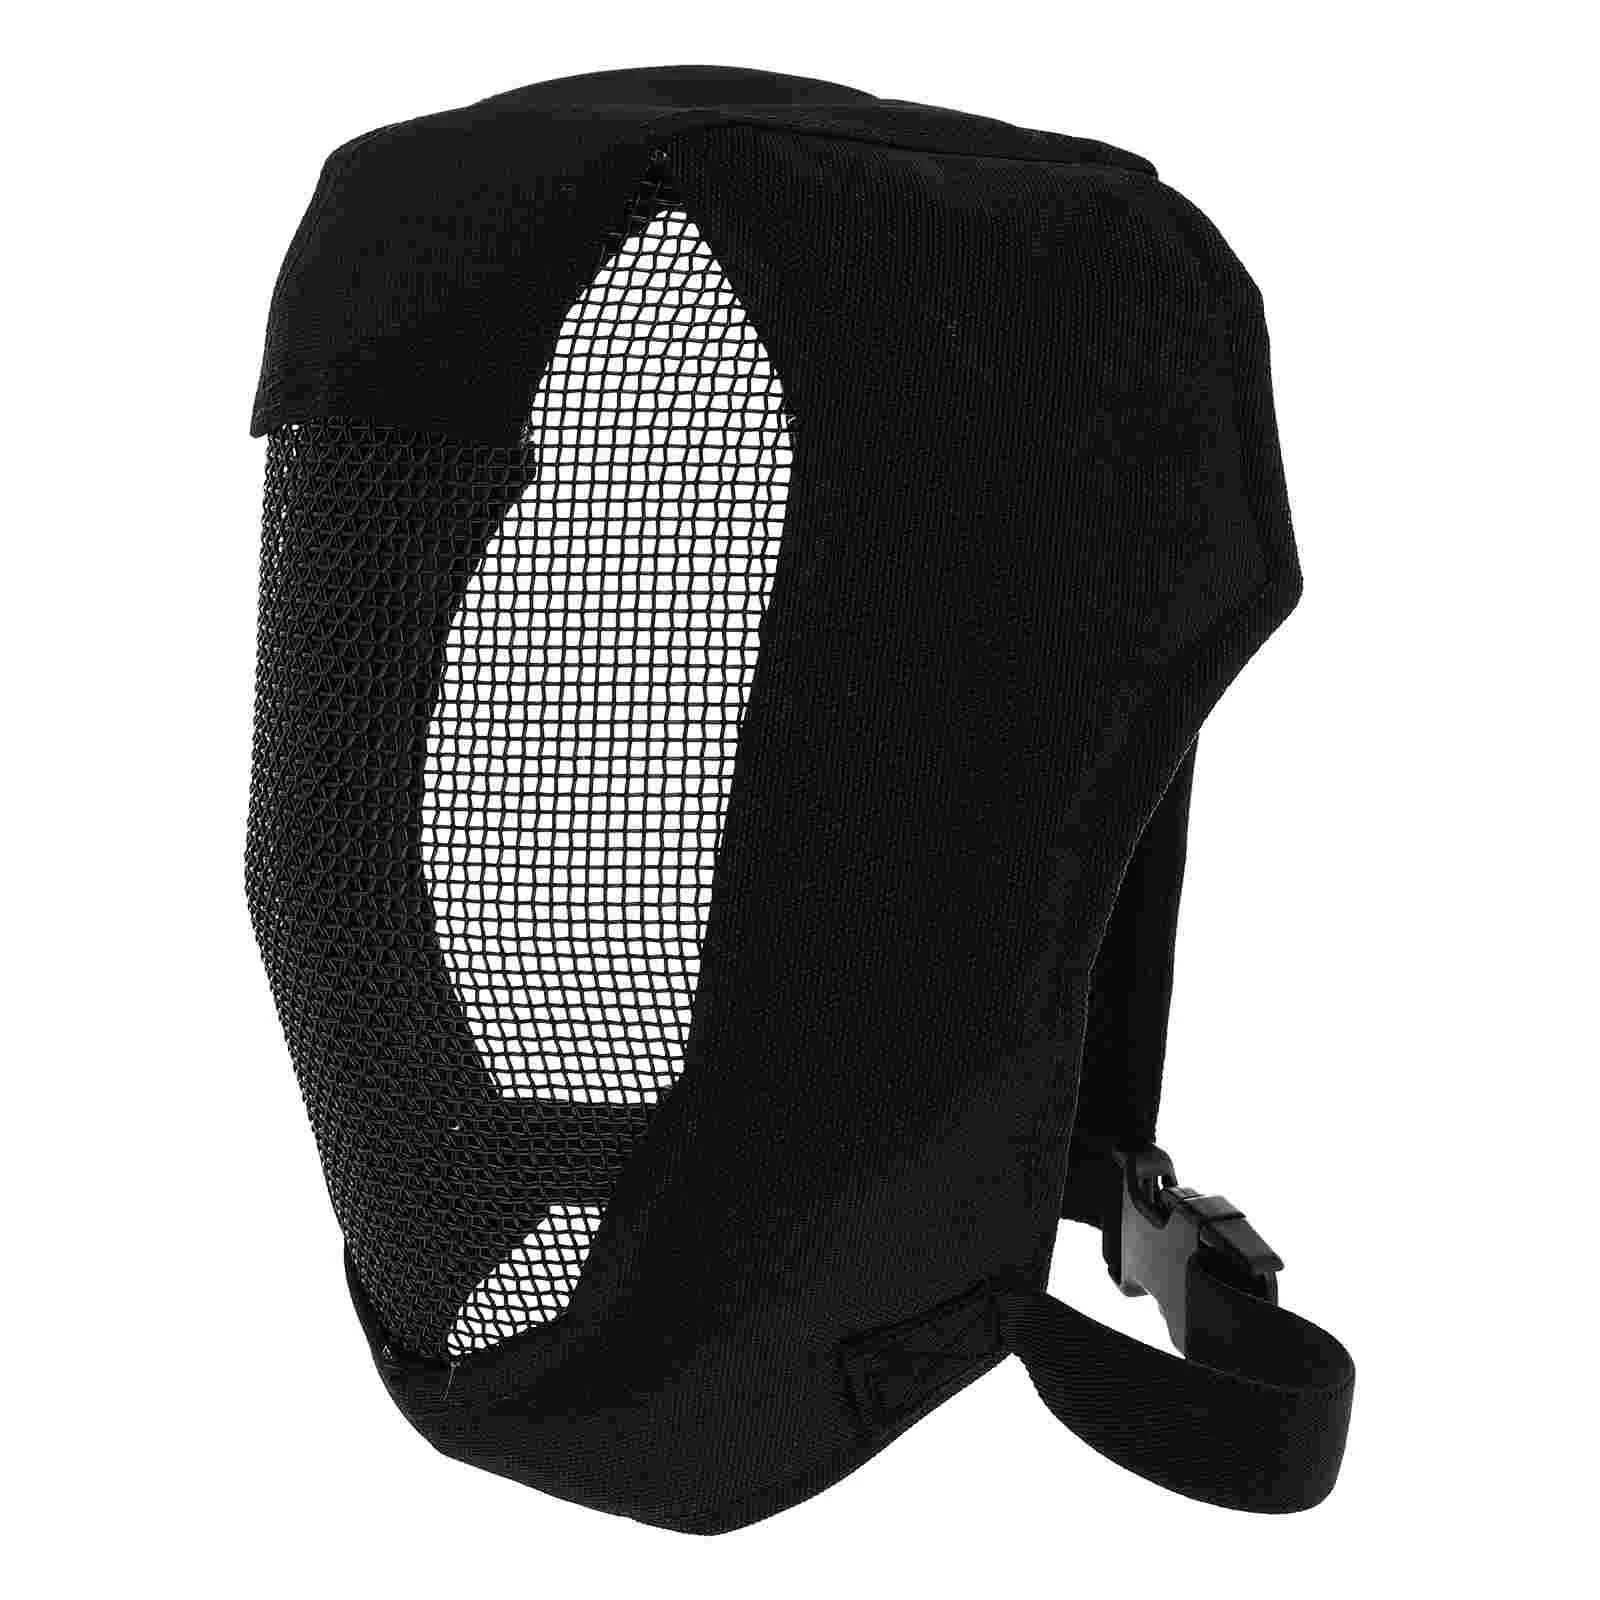 

Safety Outdoor Game Mask Fencing Facial Accessories Breathable Protective Black Masks Field Head Cover